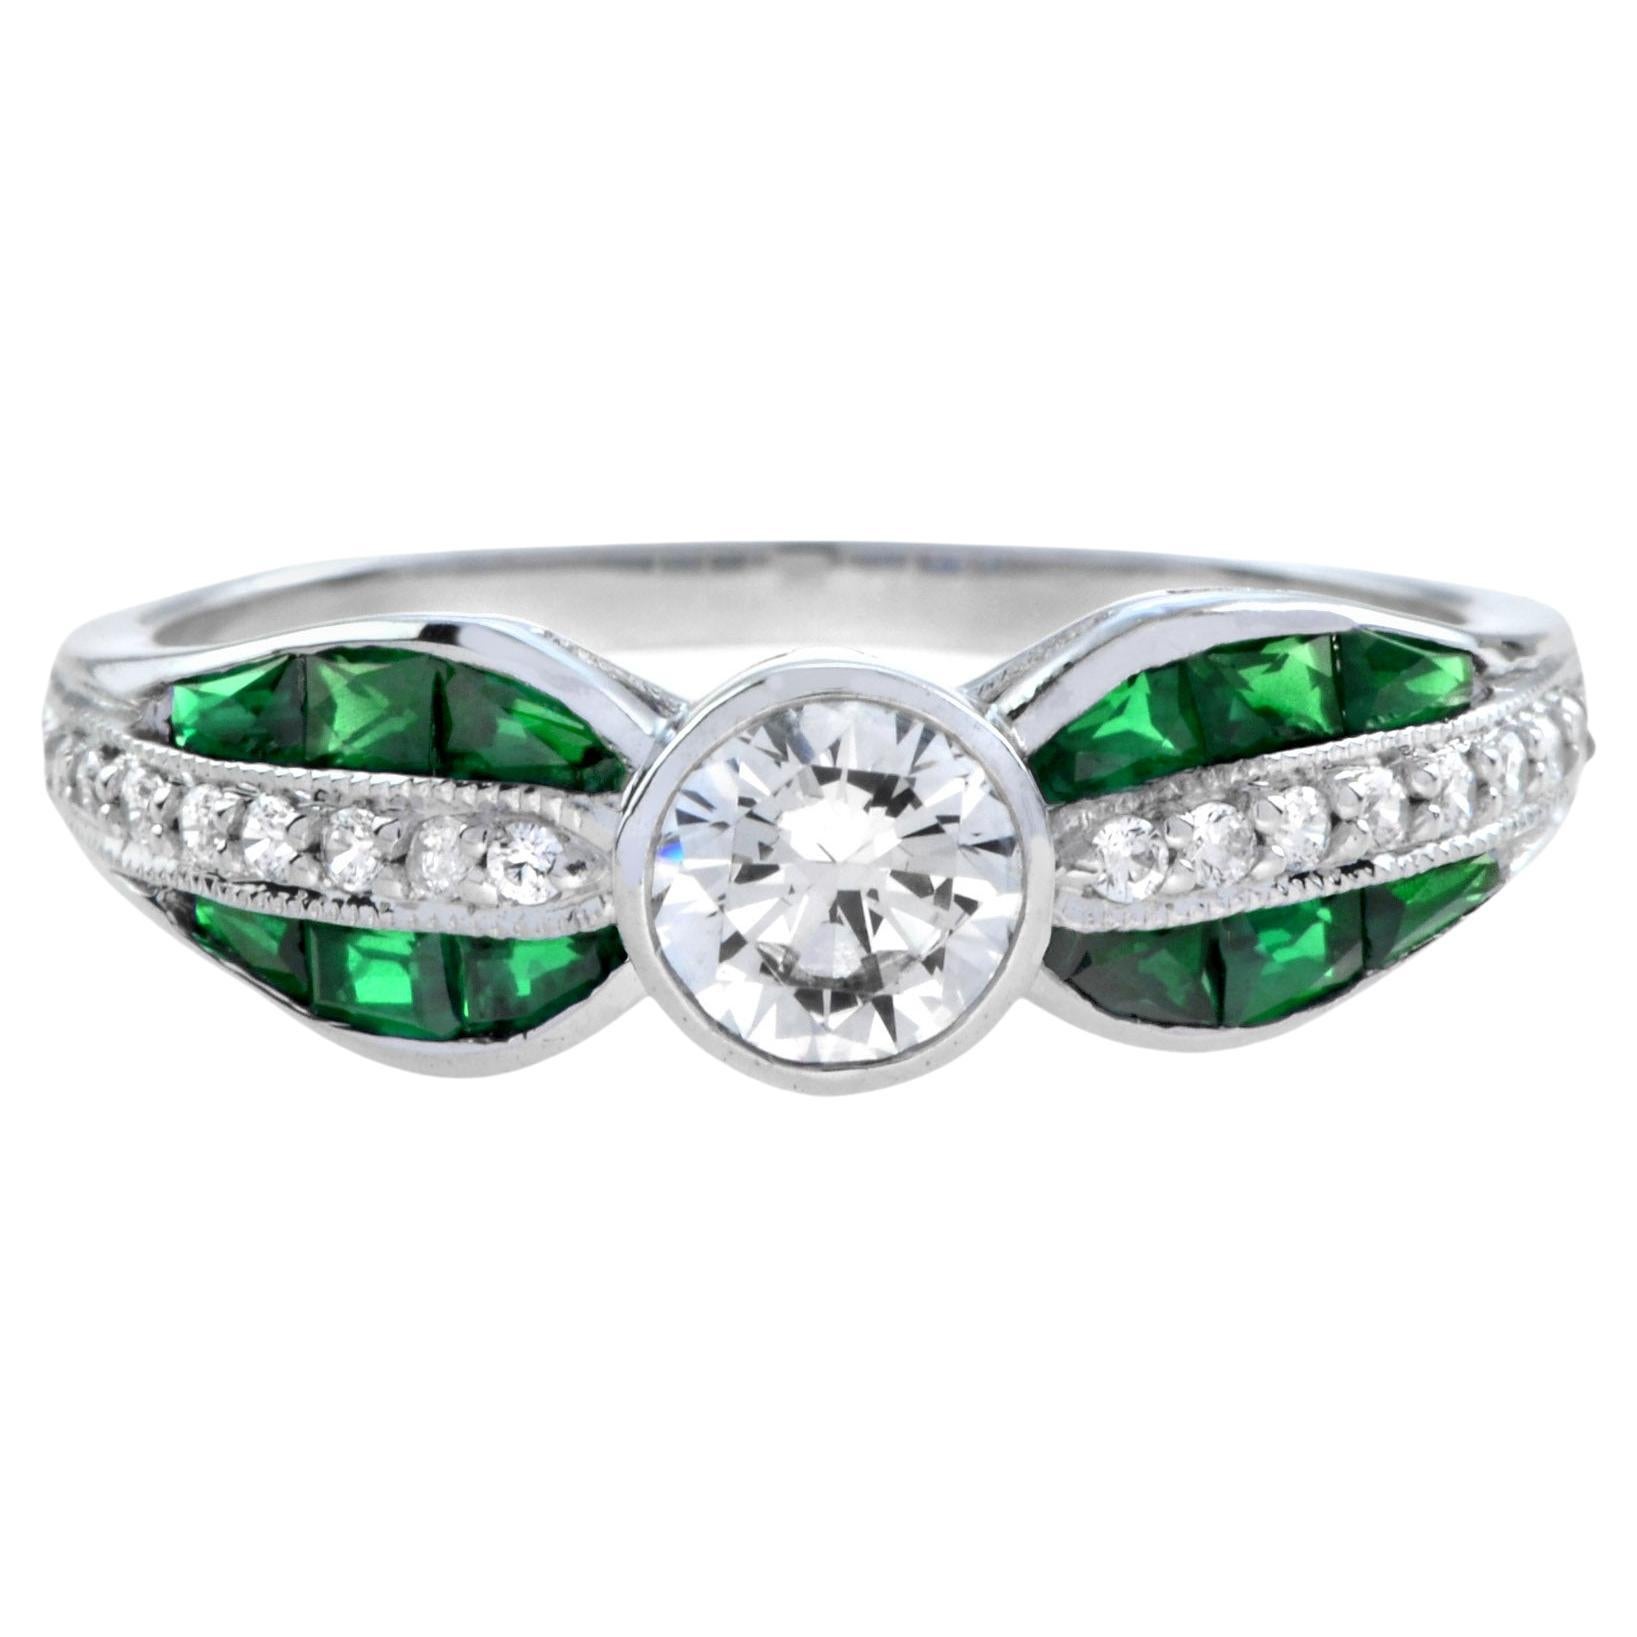 Fleur Leaf Diamond and Emerald Art Deco Style Ring in 18K White Gold